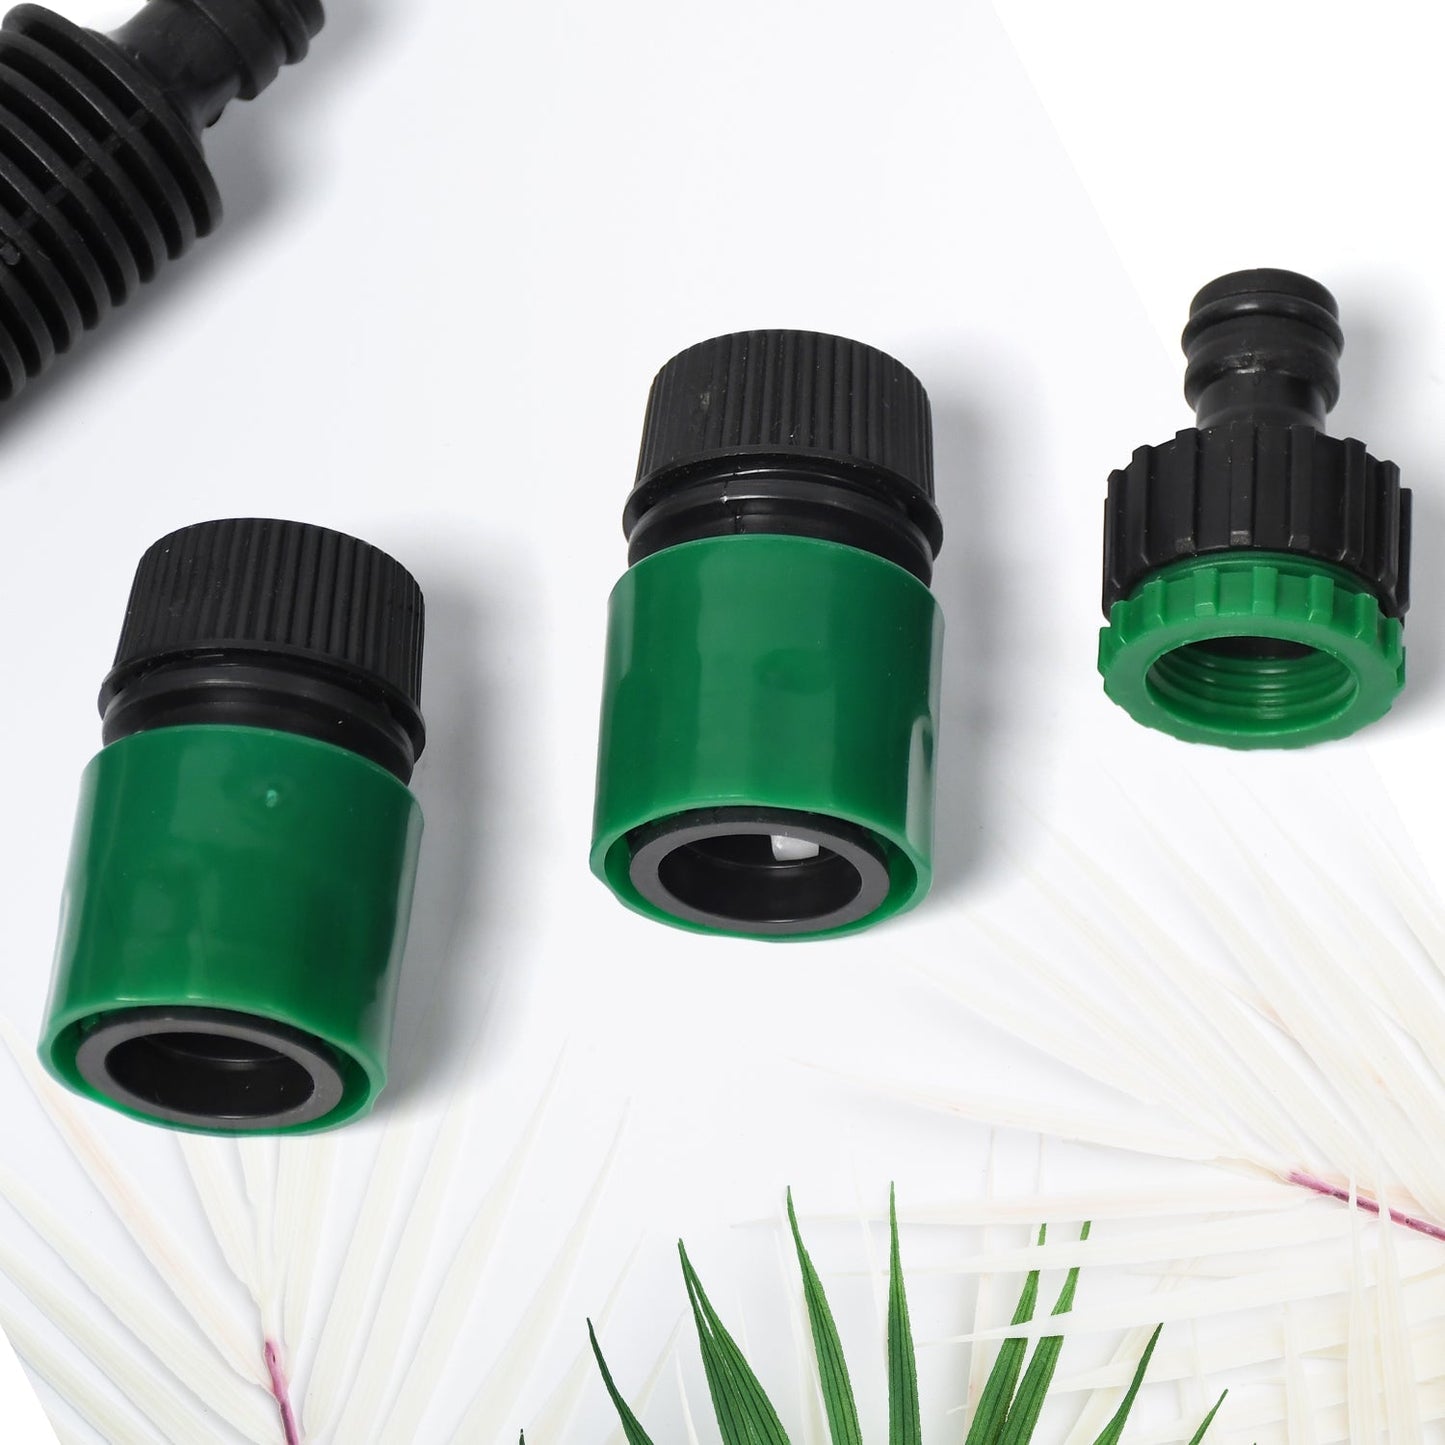 1796 Water Hose Pipe Tap Nozzle Connector Set Fitting Adapter Hose lock Garden Water Hose Pipe Tap Nozzle JK Trends